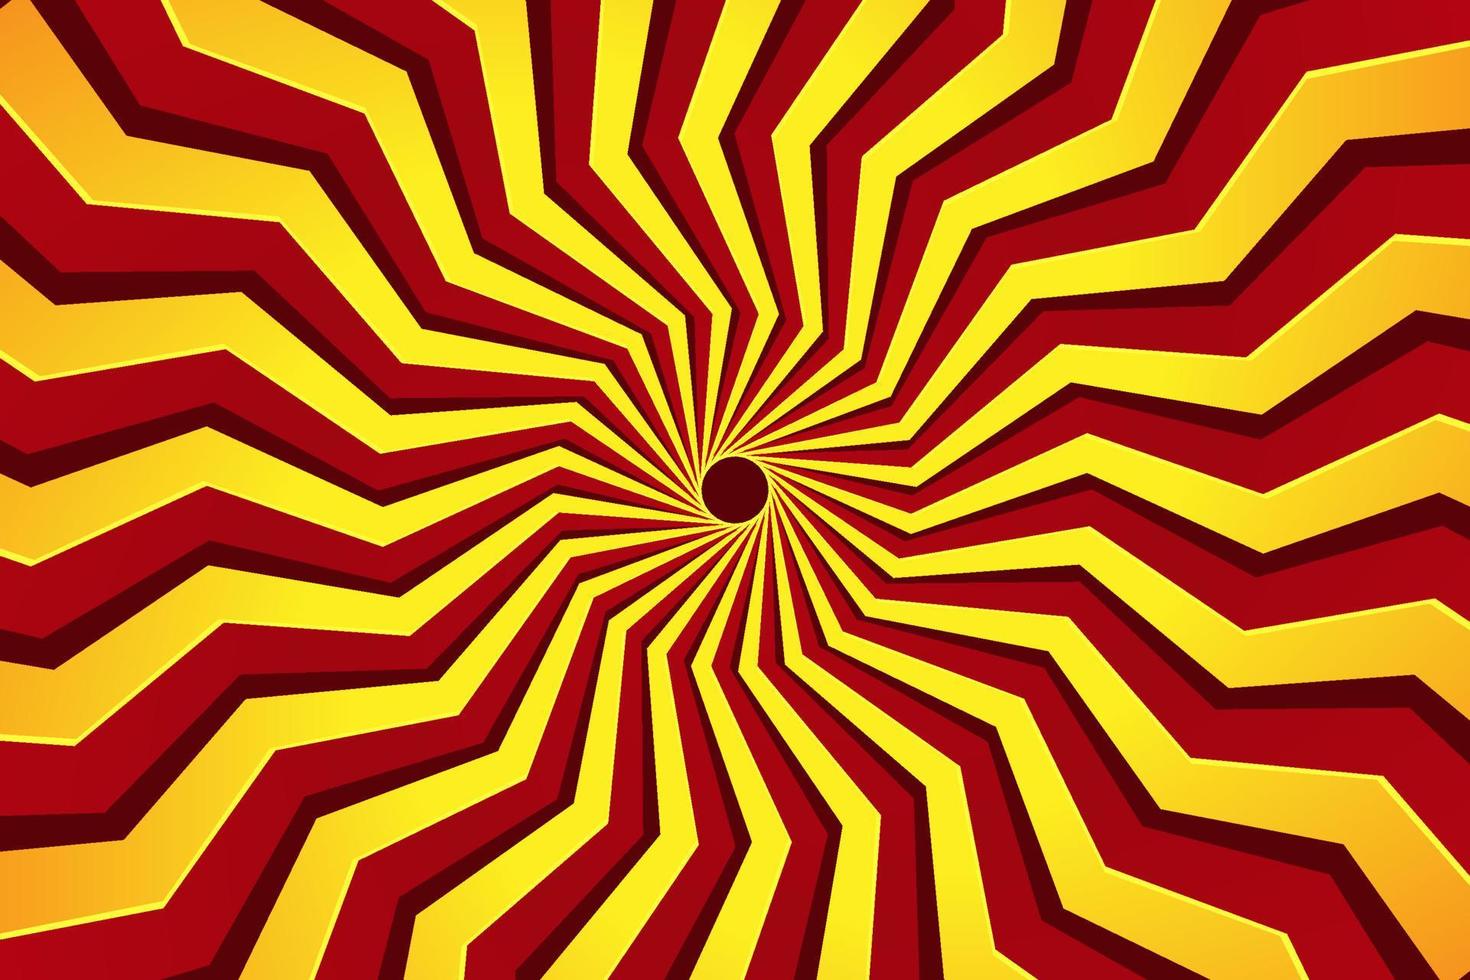 Red and yellow psychedelic sunburst abstract background design vector